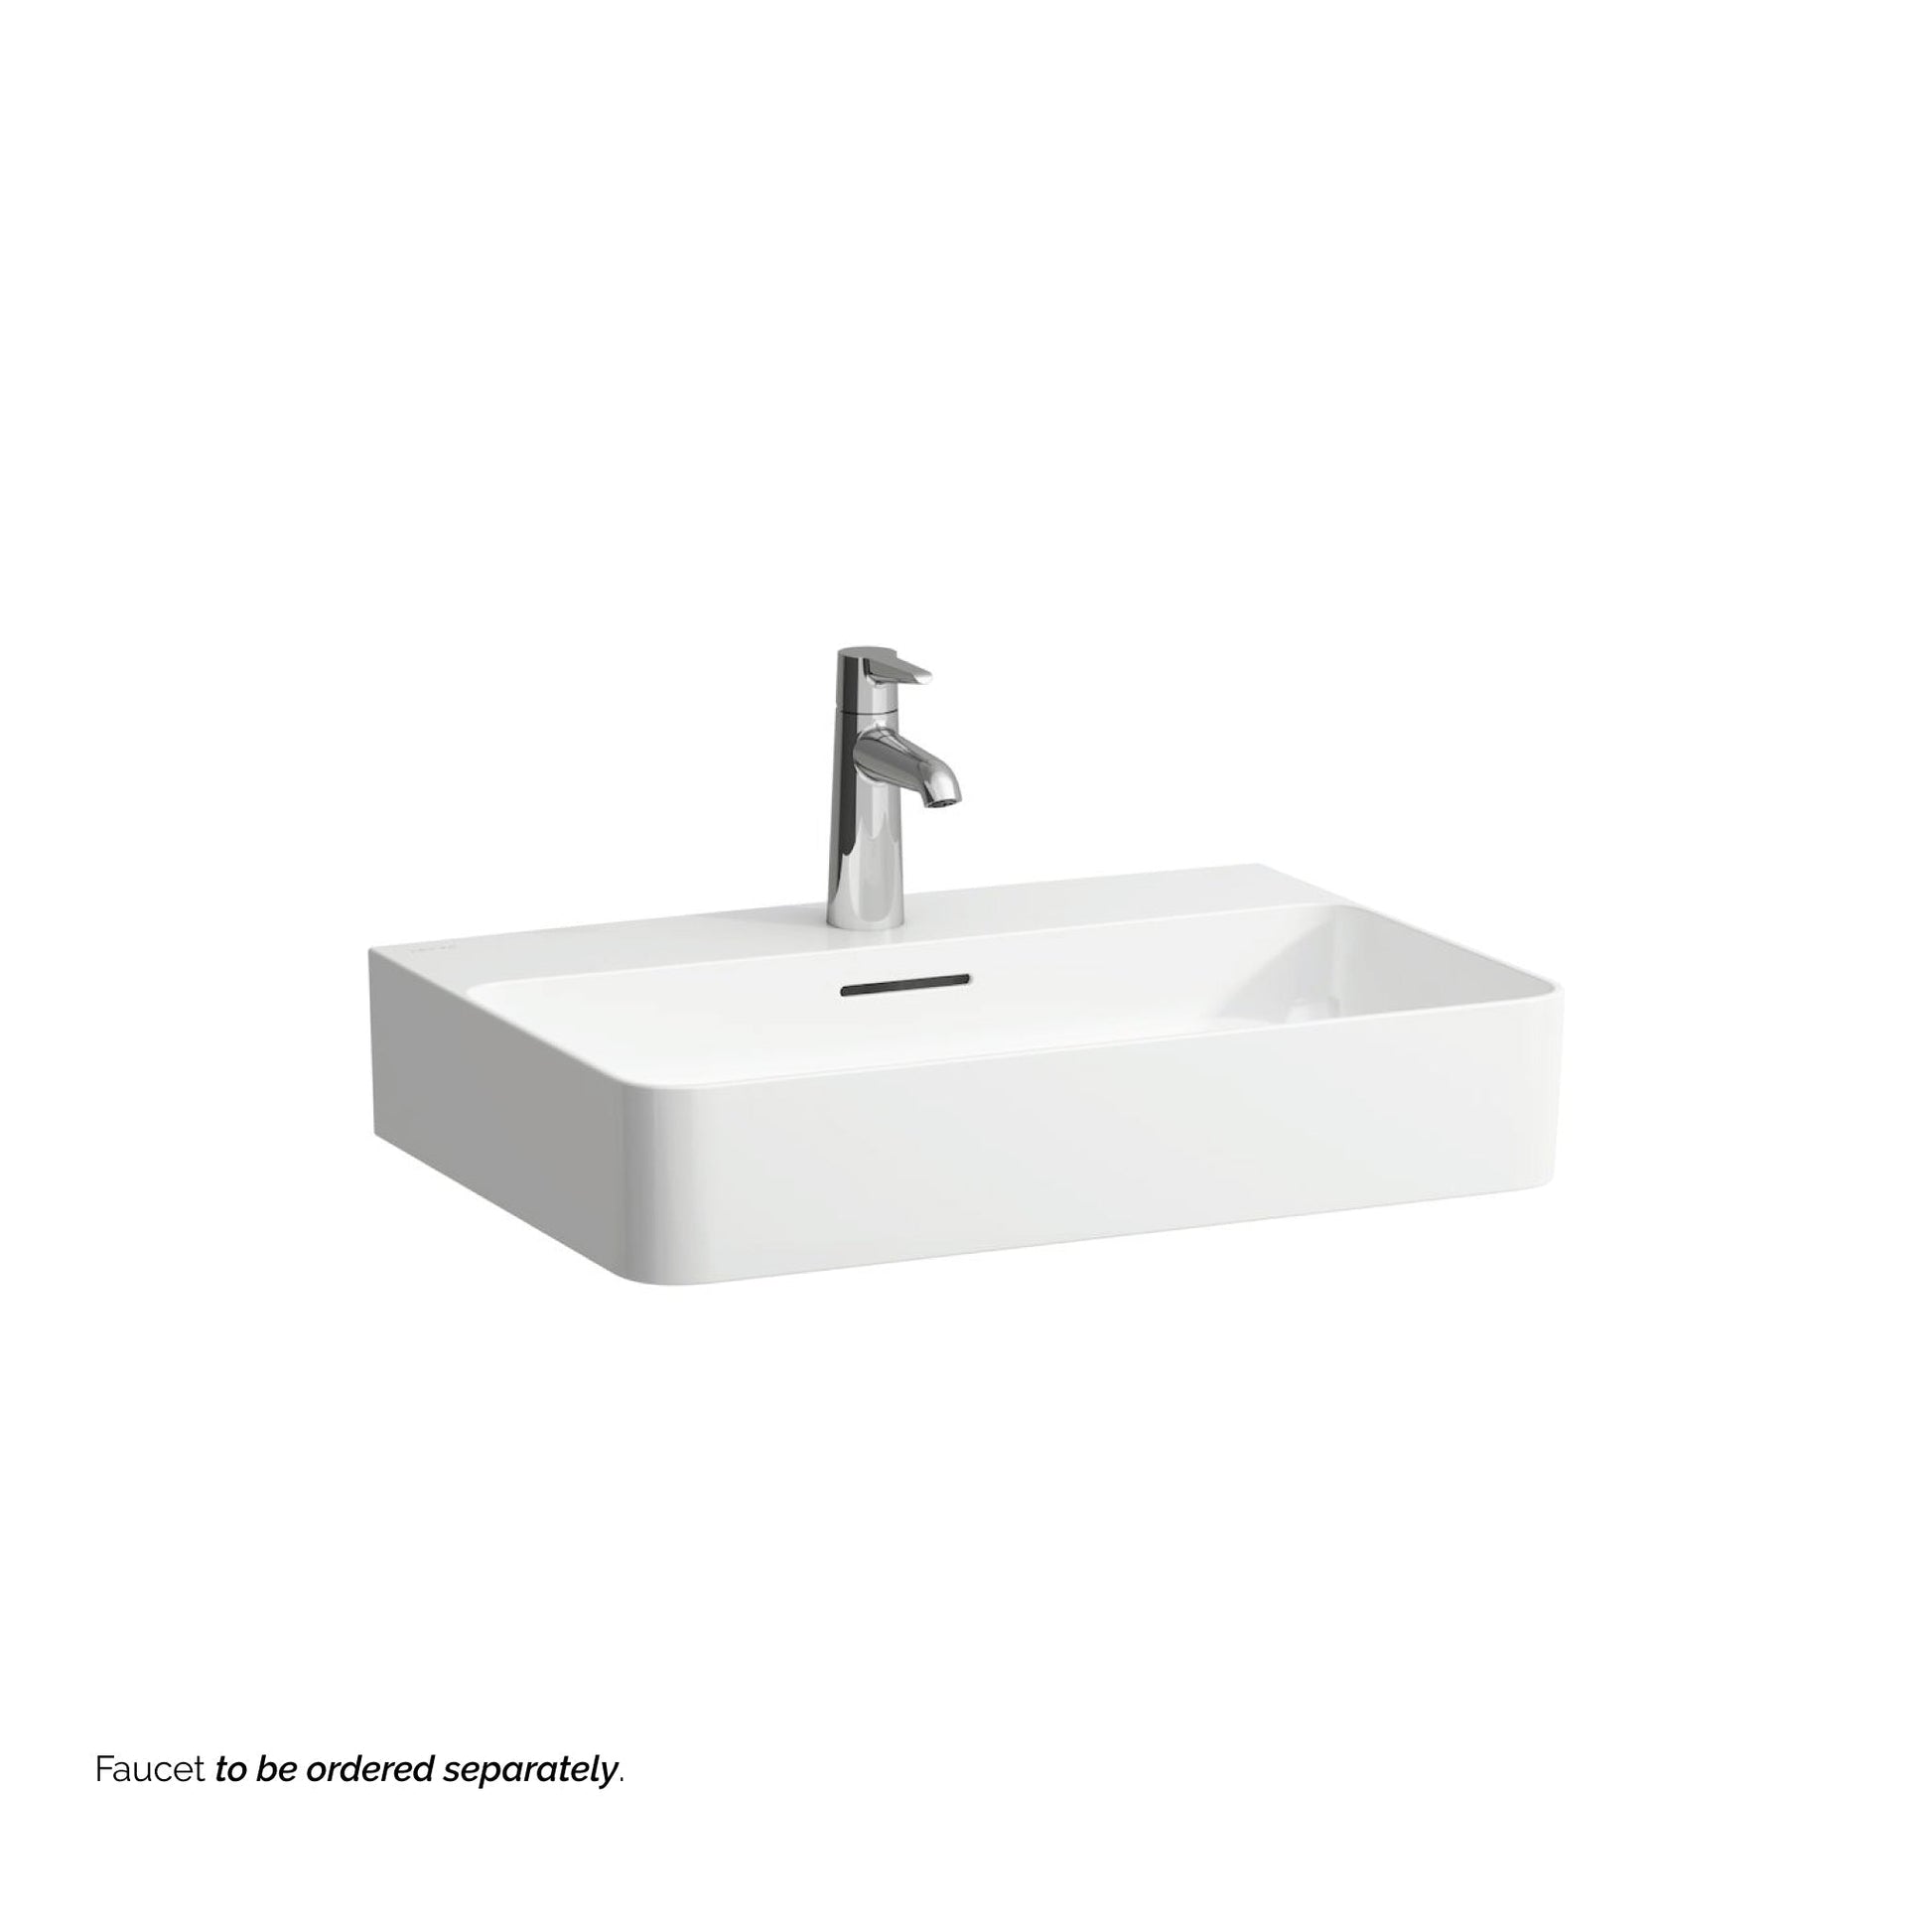 Laufen Val 24" x 17" White Ceramic Wall-Mounted Bathroom Sink With Faucet Hole